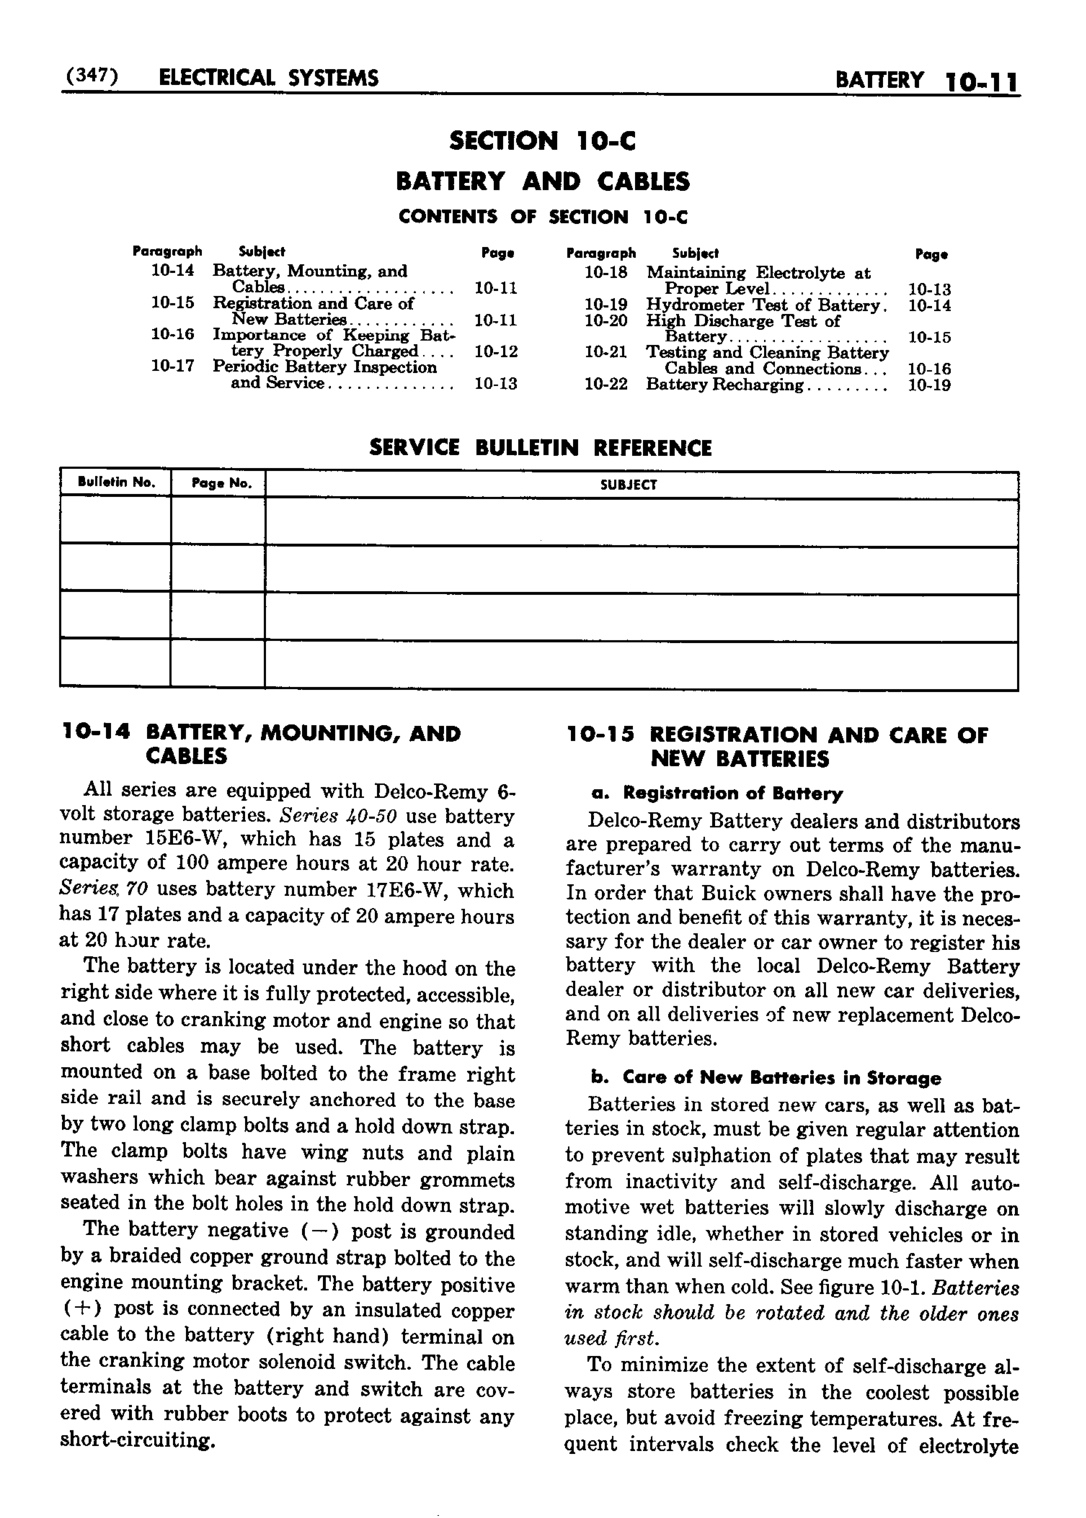 n_11 1952 Buick Shop Manual - Electrical Systems-011-011.jpg